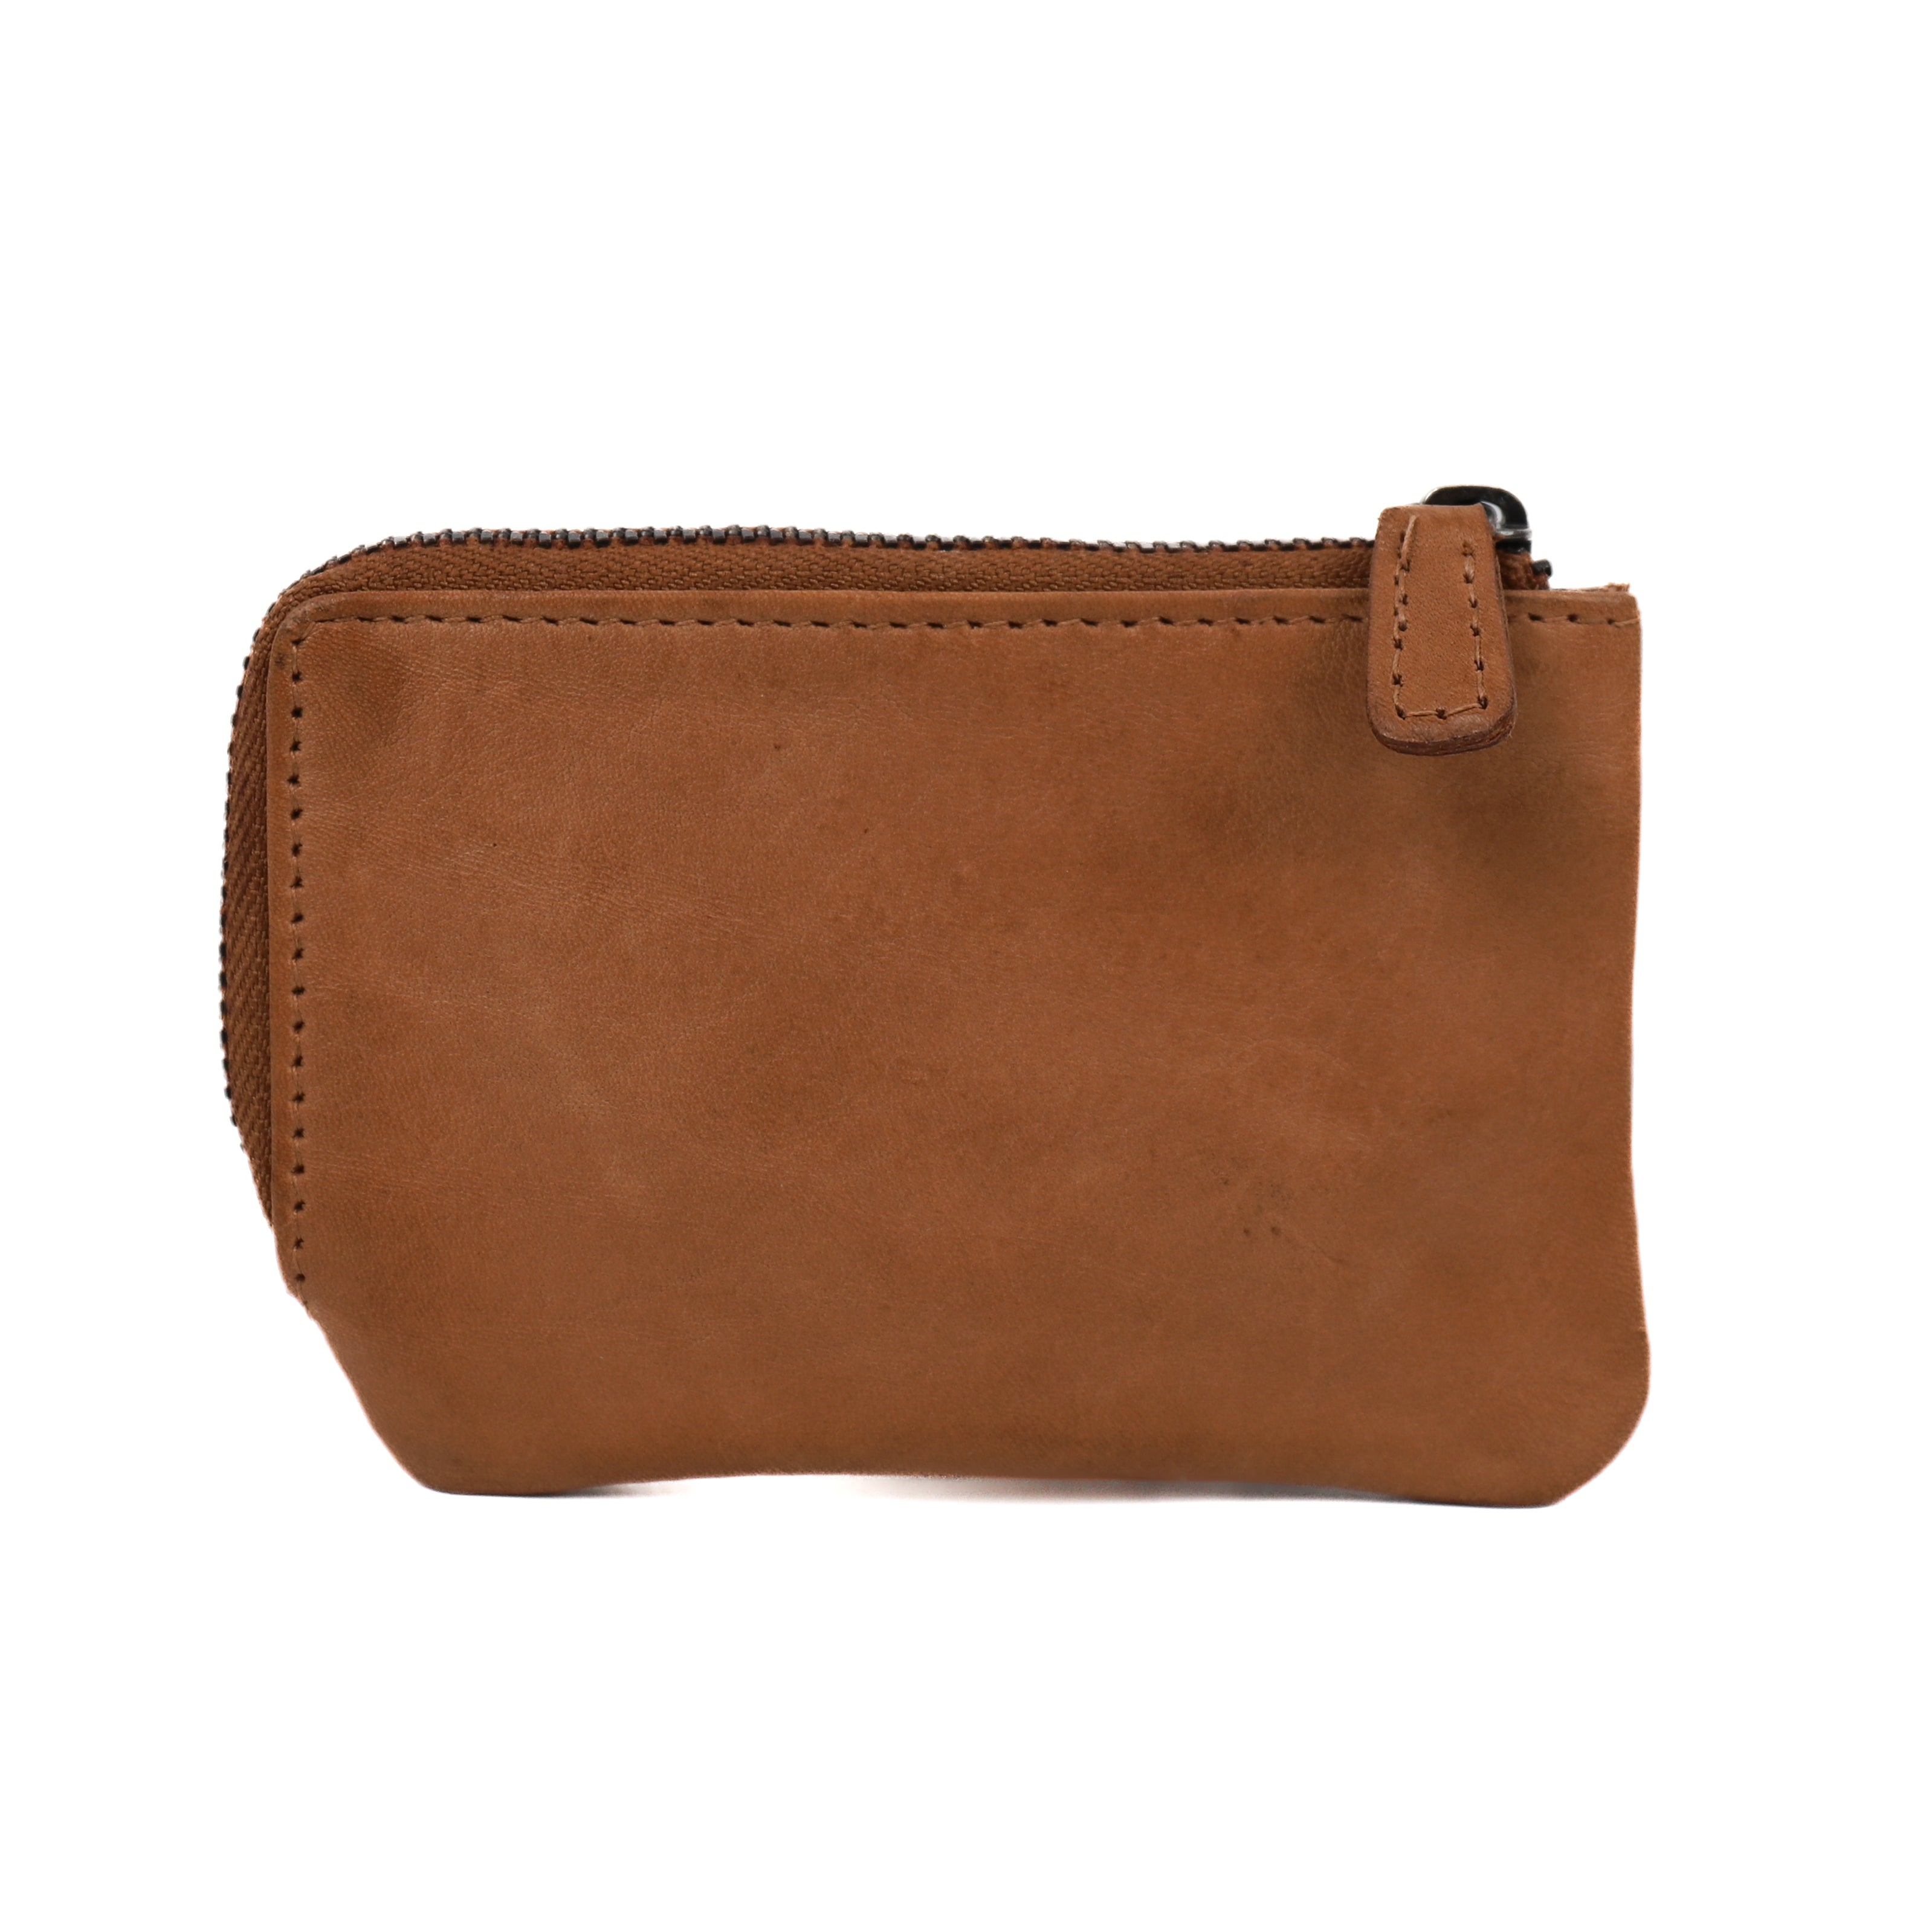 Key pouch 'Lukas' taupe